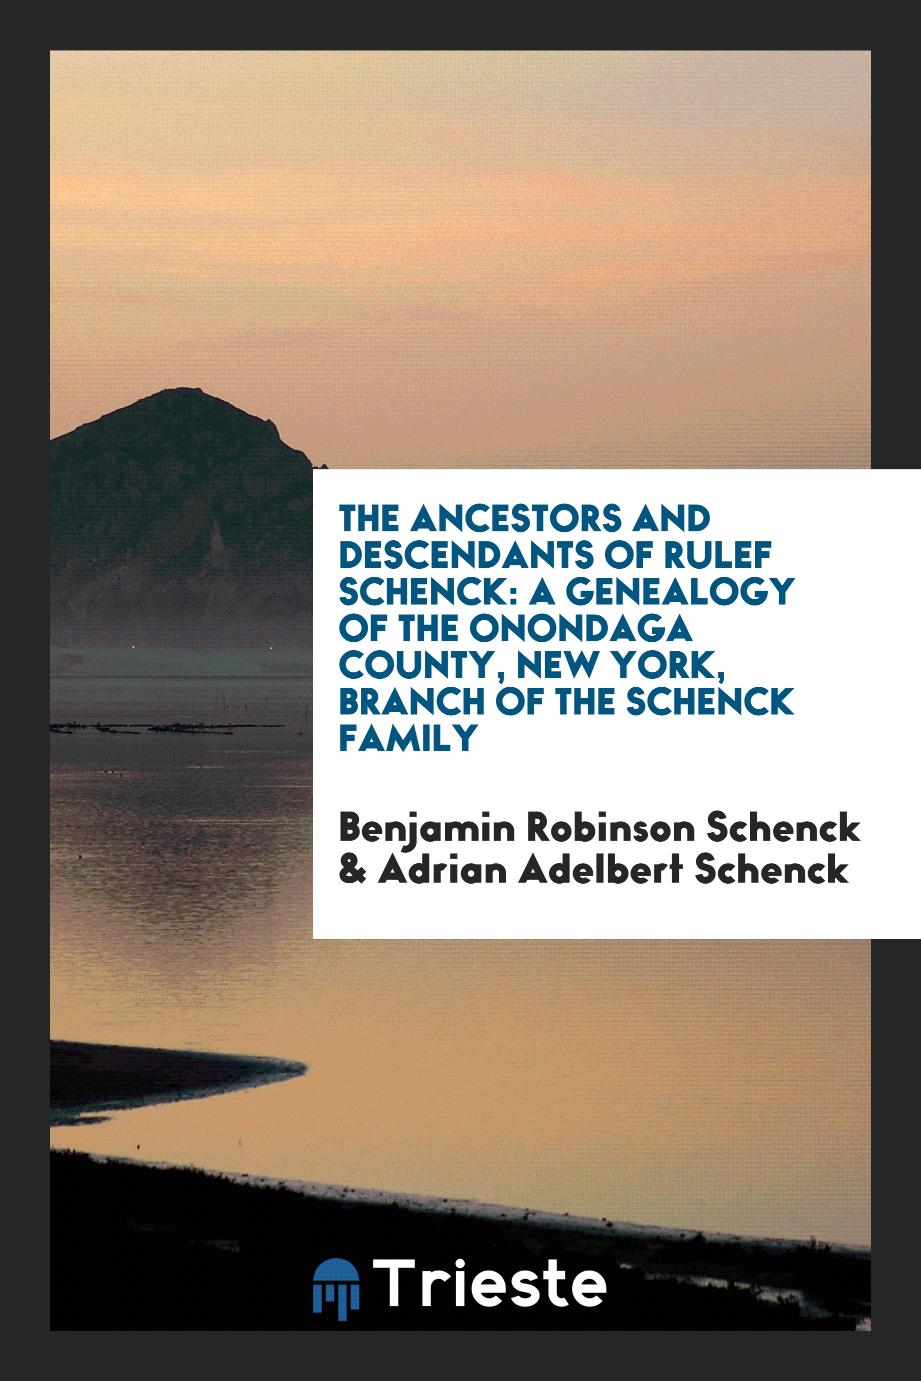 The Ancestors and Descendants of Rulef Schenck: A Genealogy of the Onondaga County, New York, Branch of the Schenck Family